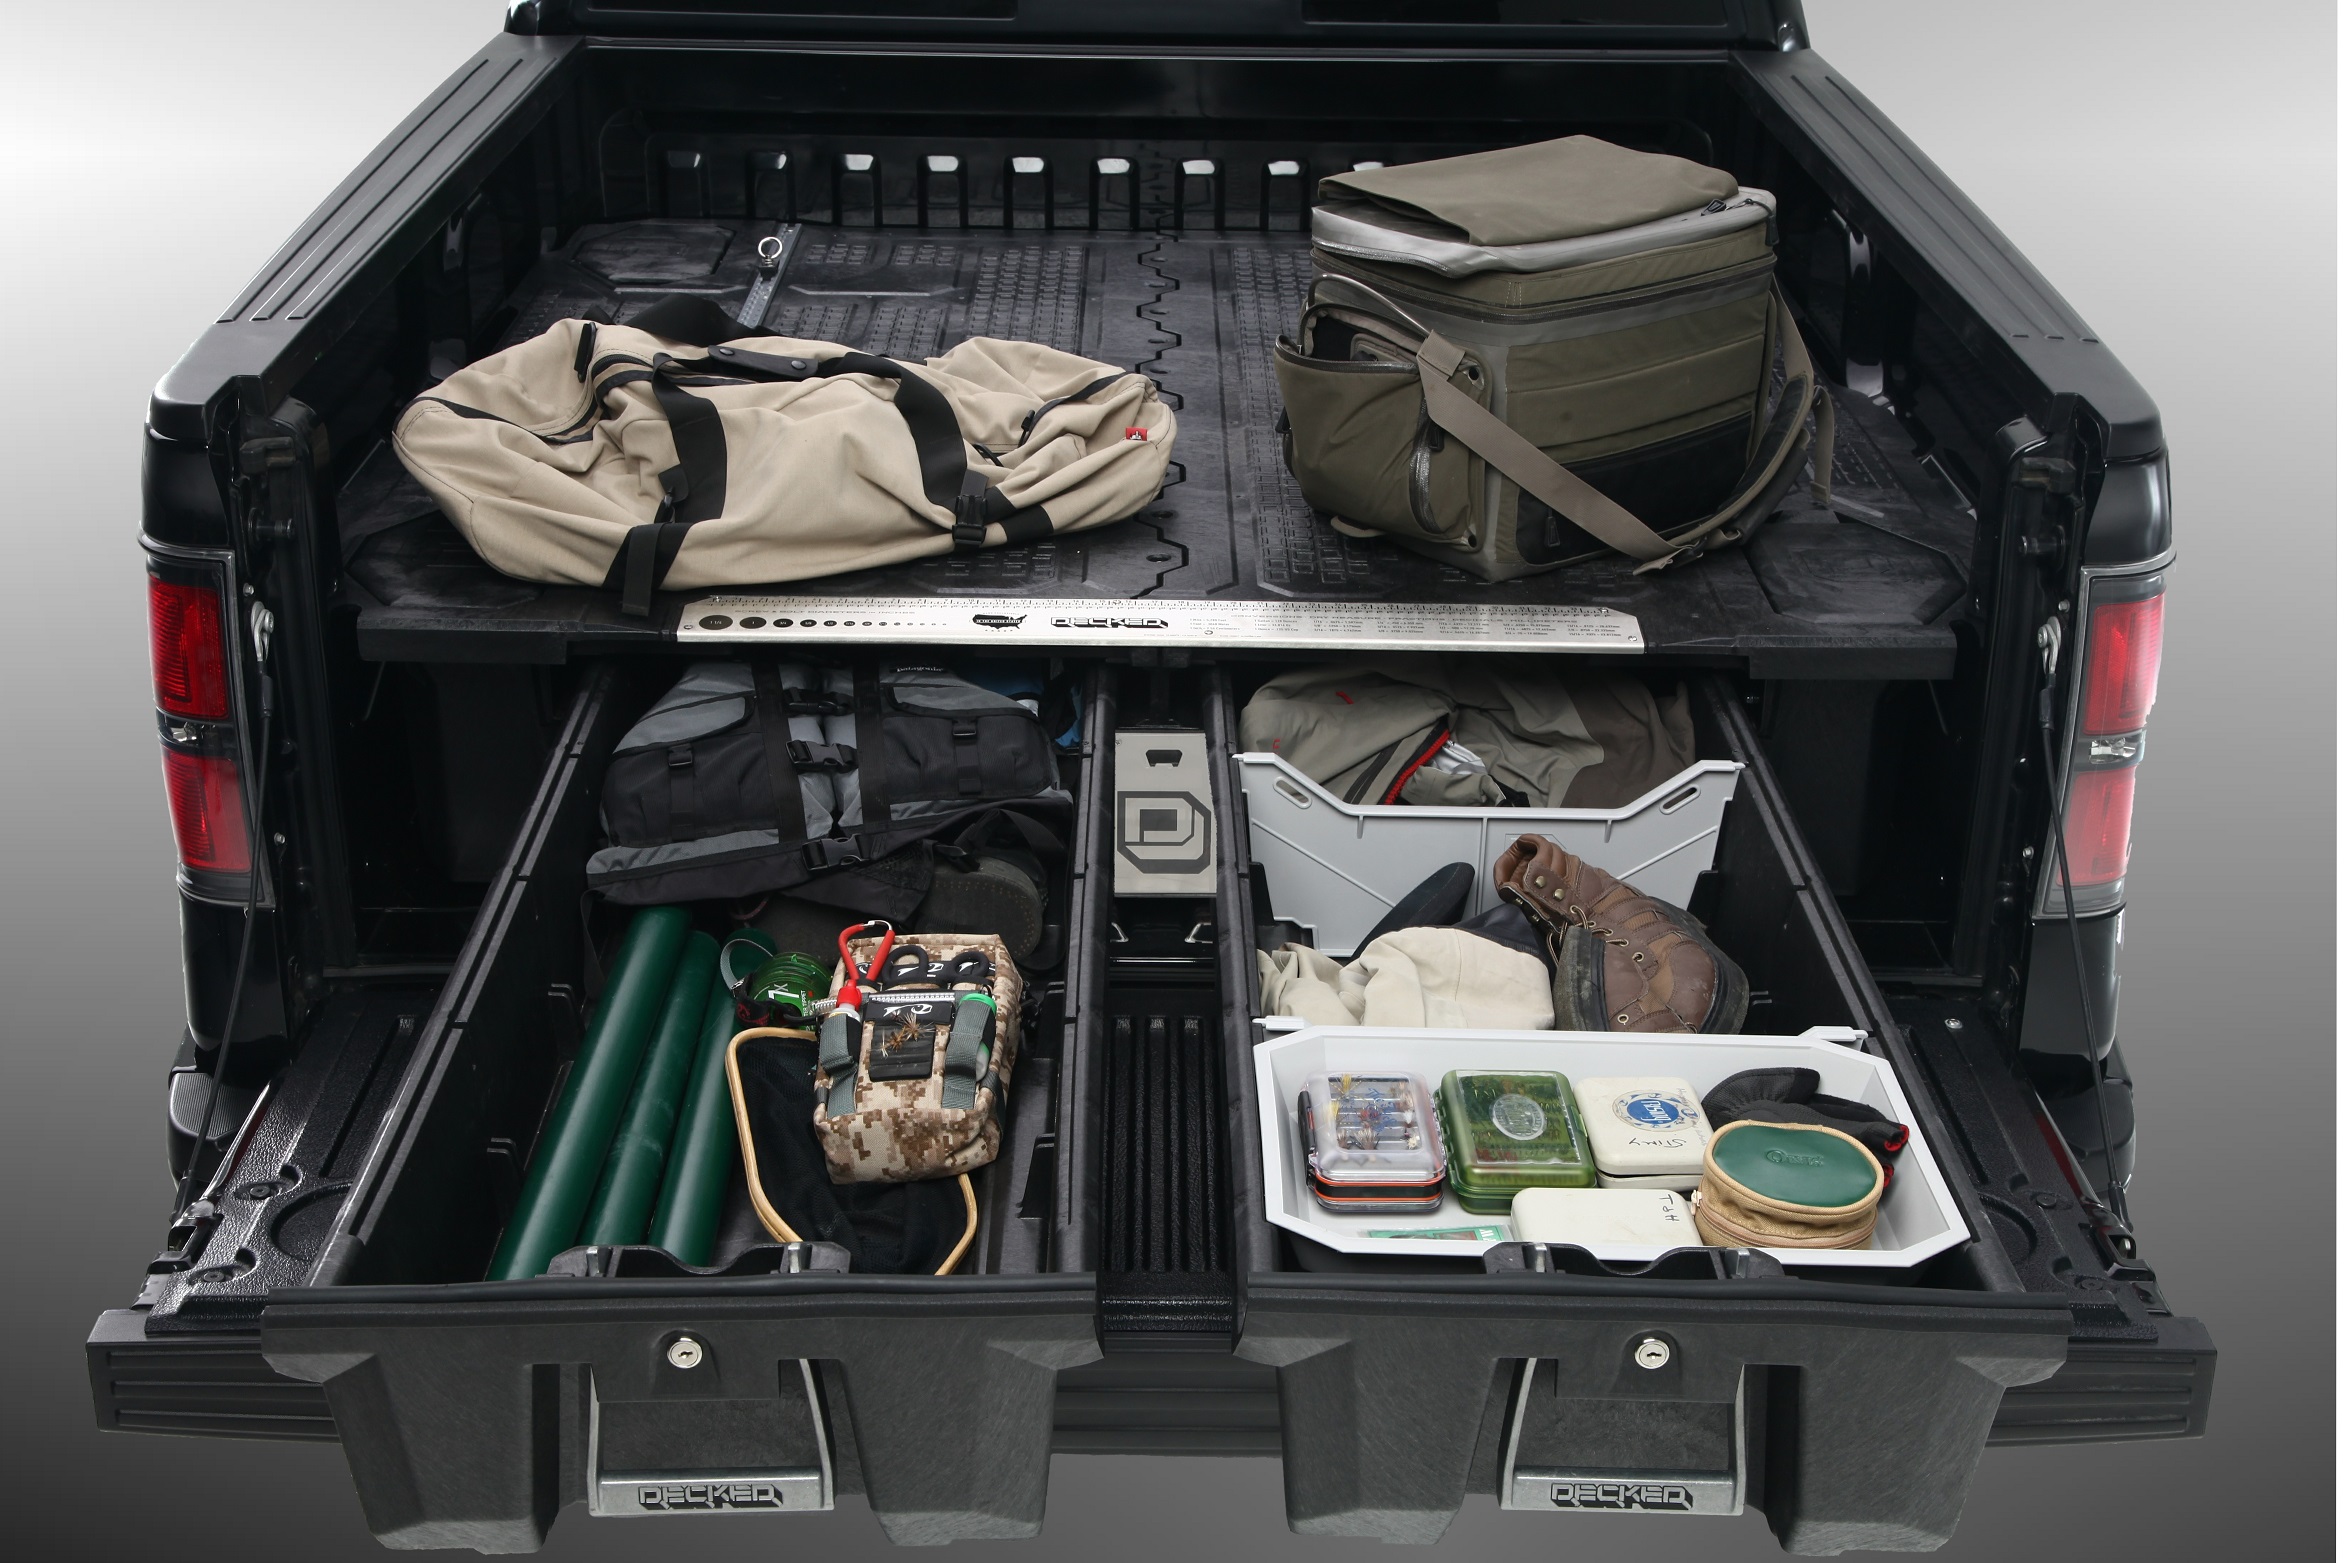 4WP Brings a New Product to Their Shelves: DECKED Truck Bed Organizers